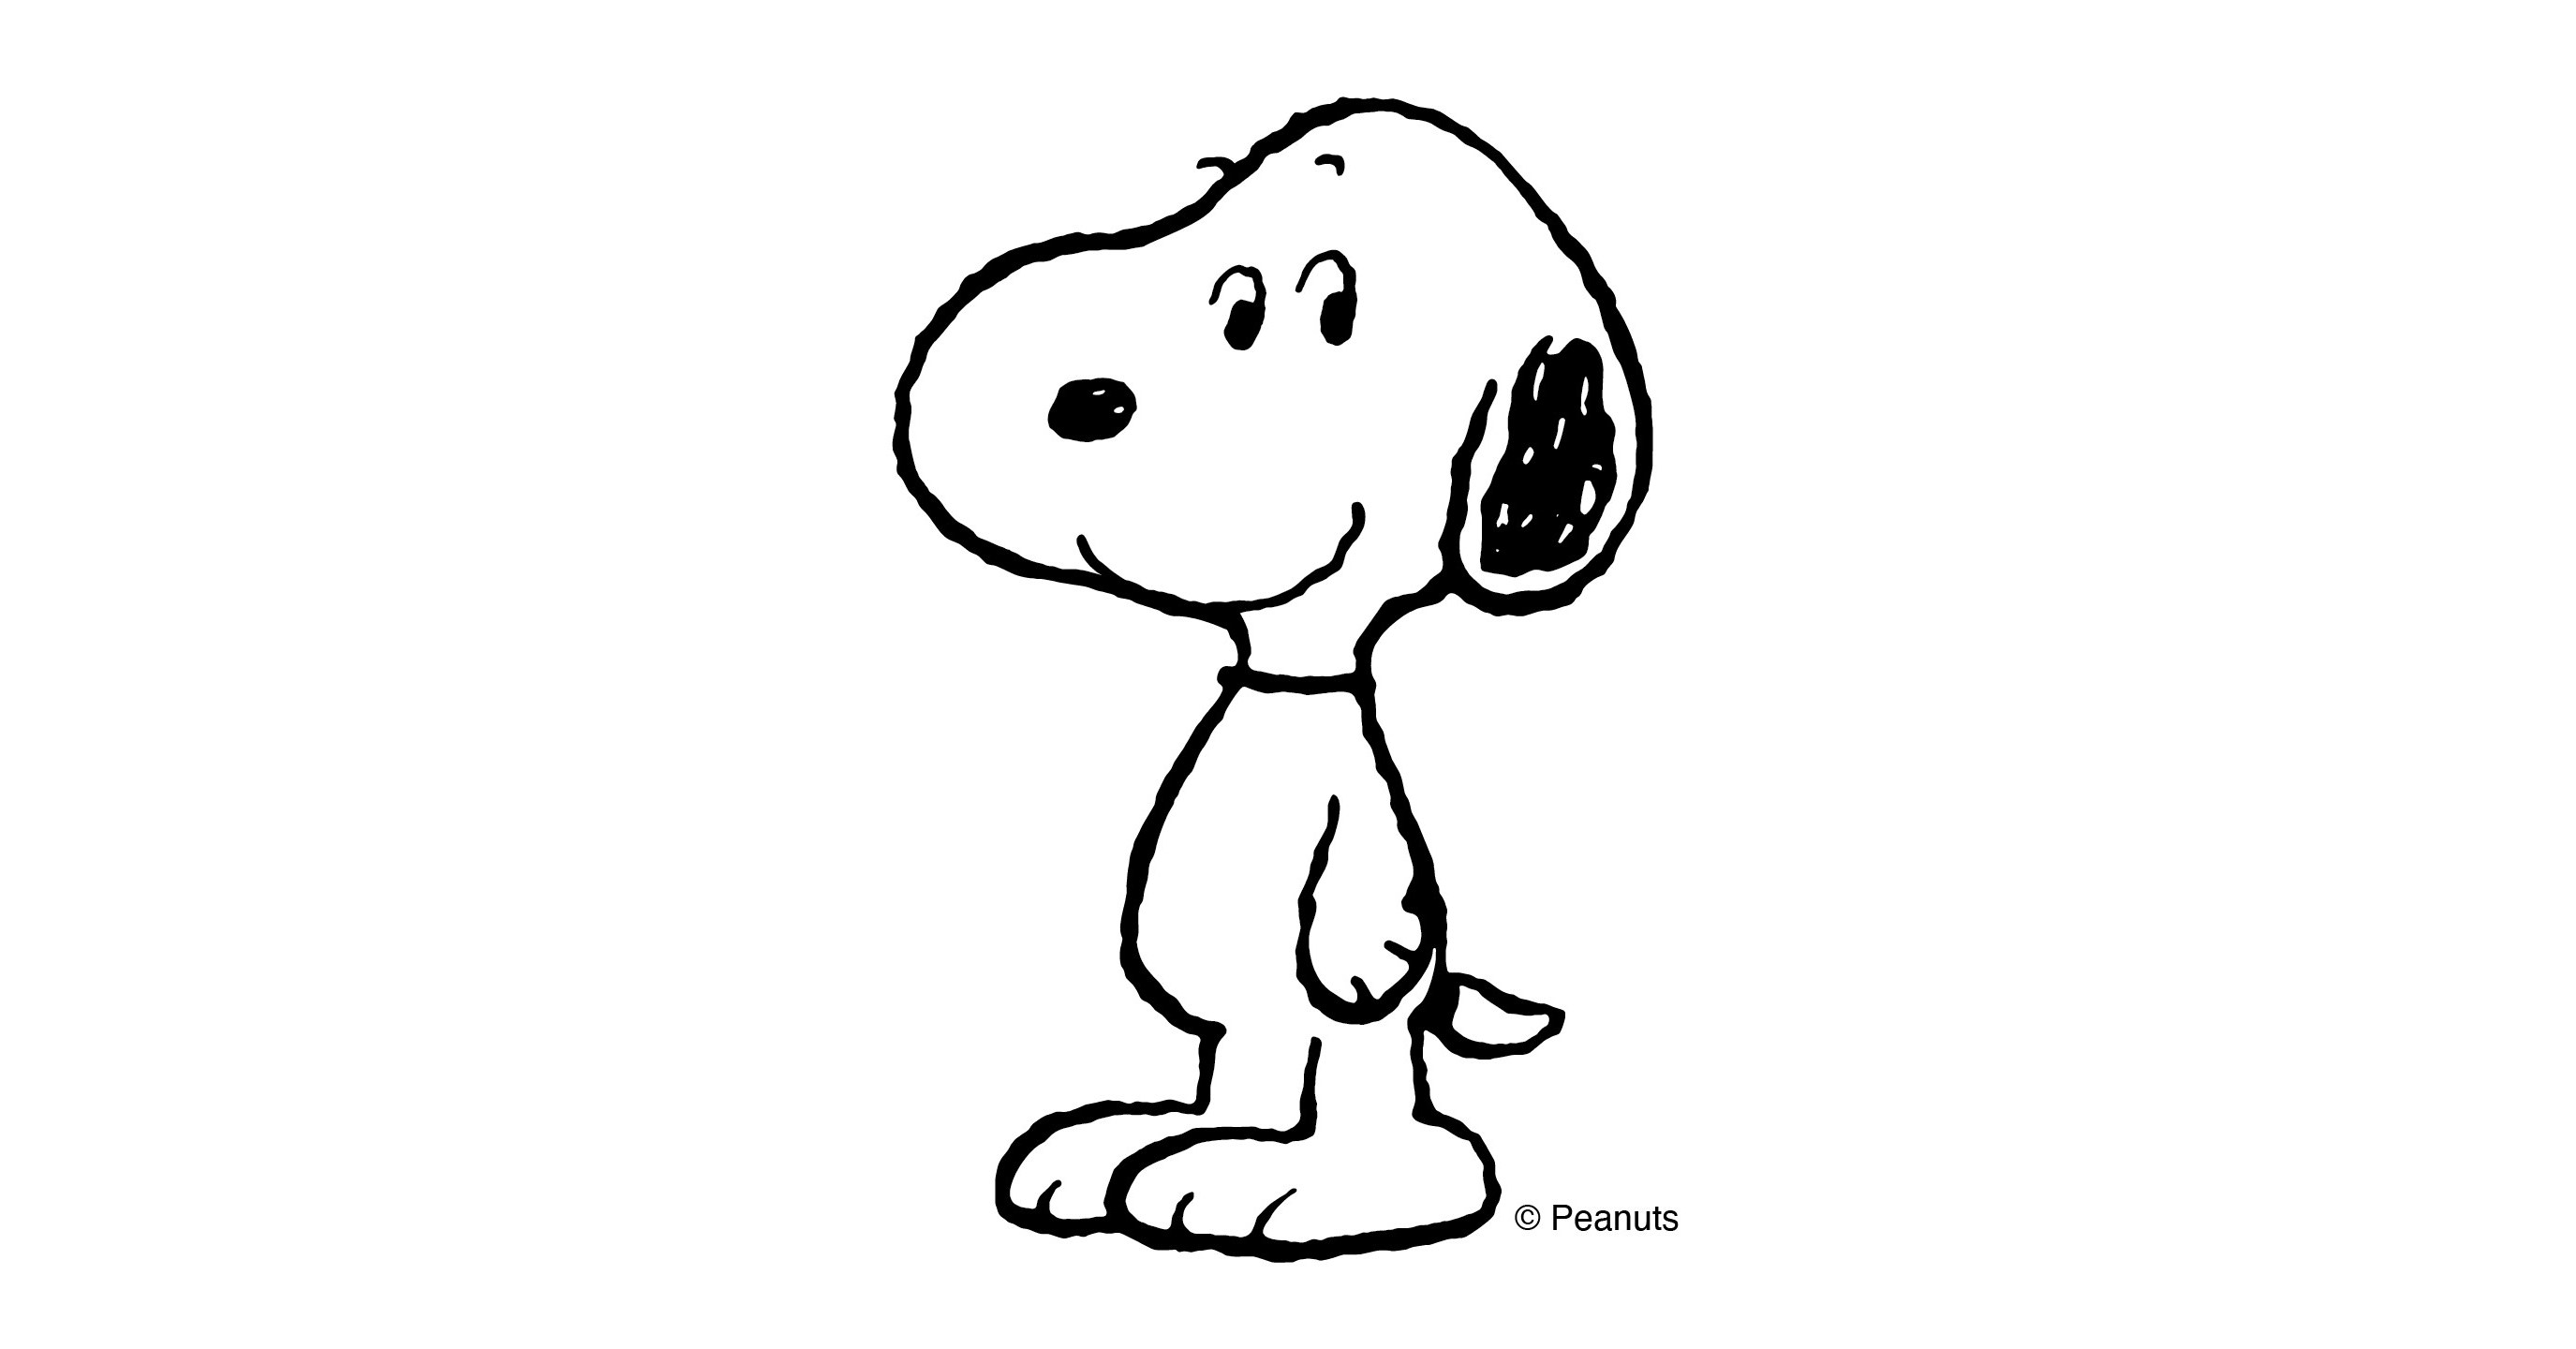 WildBrain CPLG Adds Consumer Products Agency Rights for Snoopy and the  Peanuts Gang Across Asia-Pacific